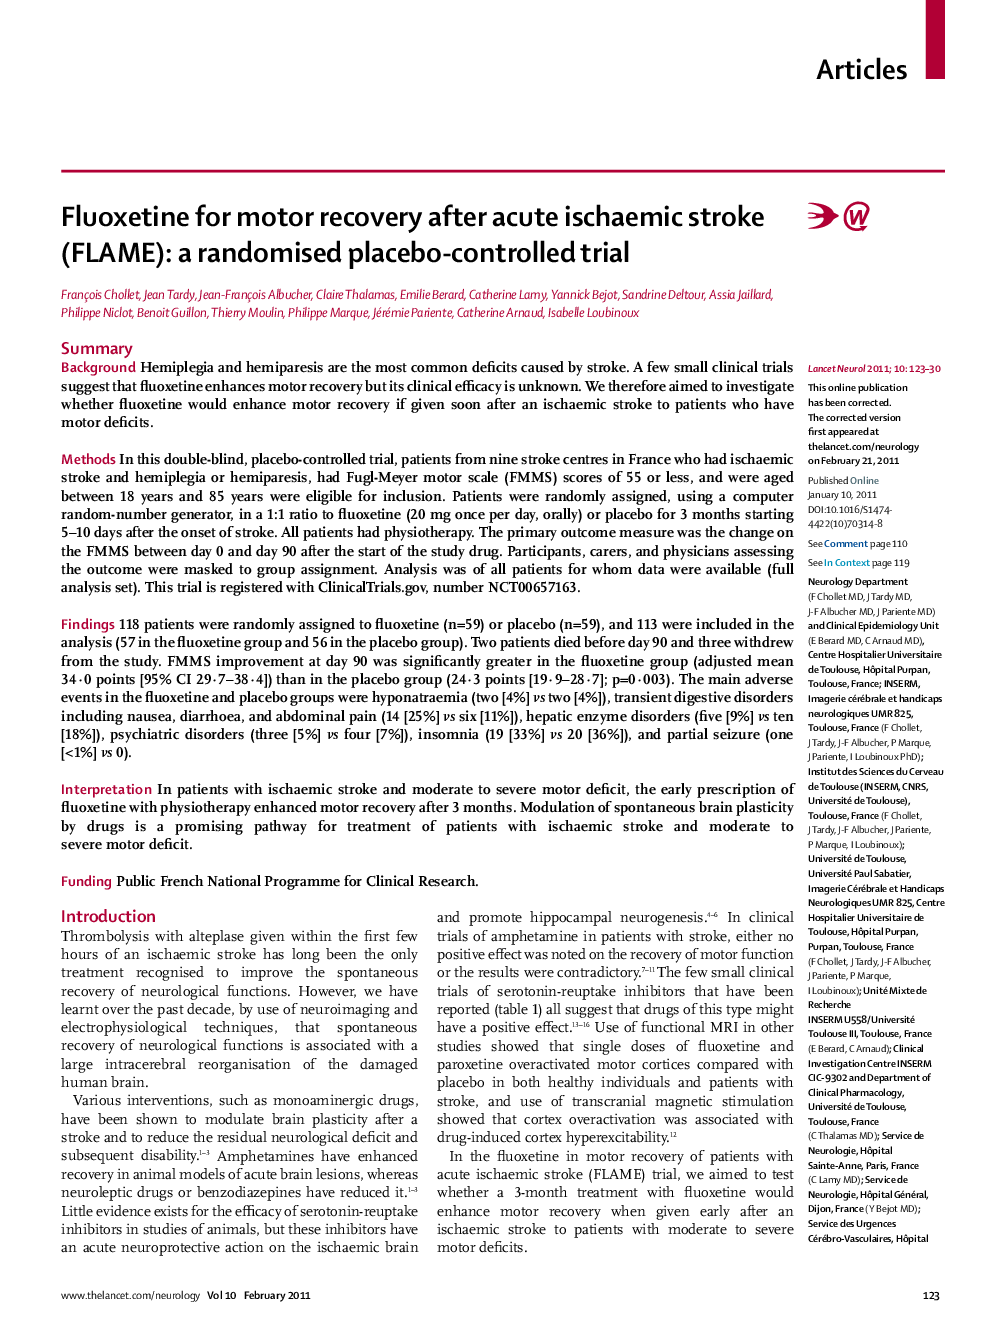 Fluoxetine for motor recovery after acute ischaemic stroke (FLAME): a randomised placebo-controlled trial